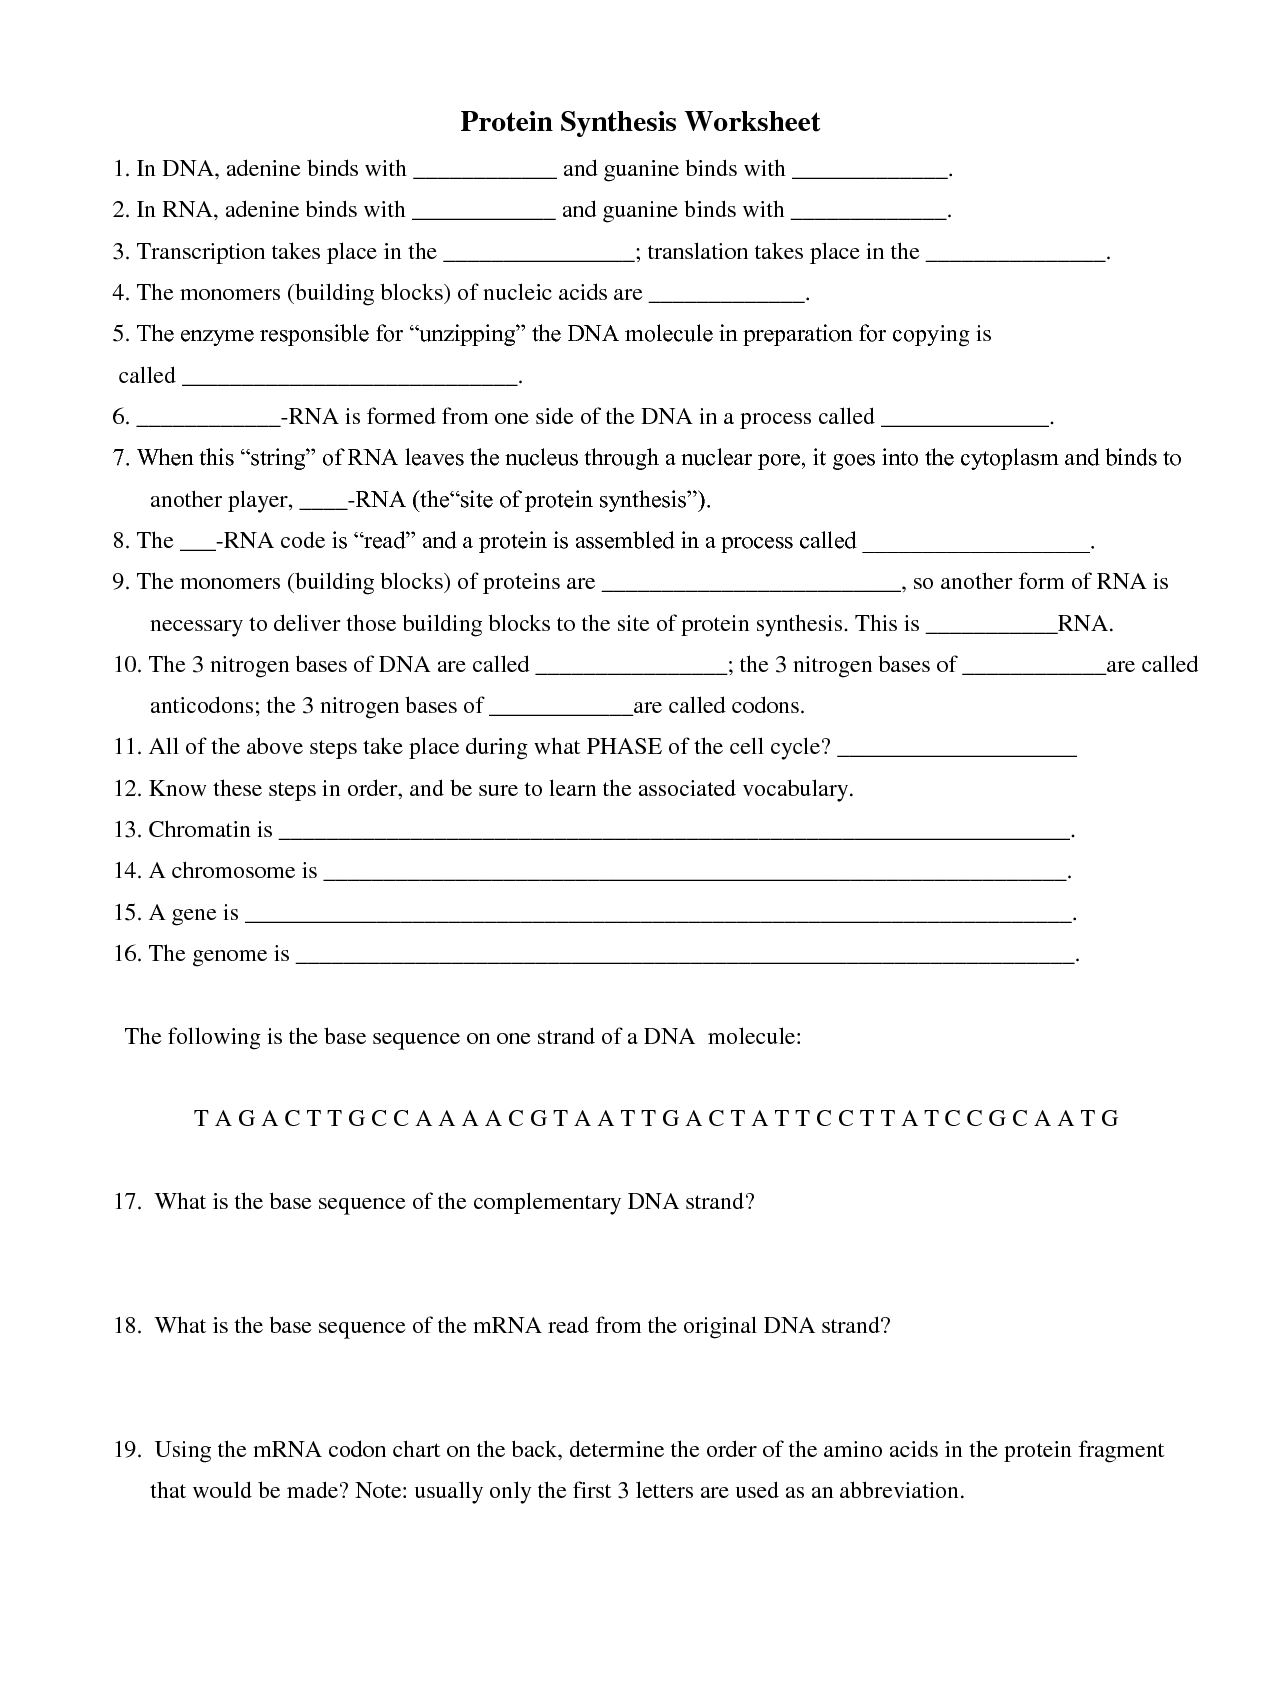 Protein Synthesis Translation Worksheet Answer Key Within Protein Synthesis Worksheet Answers